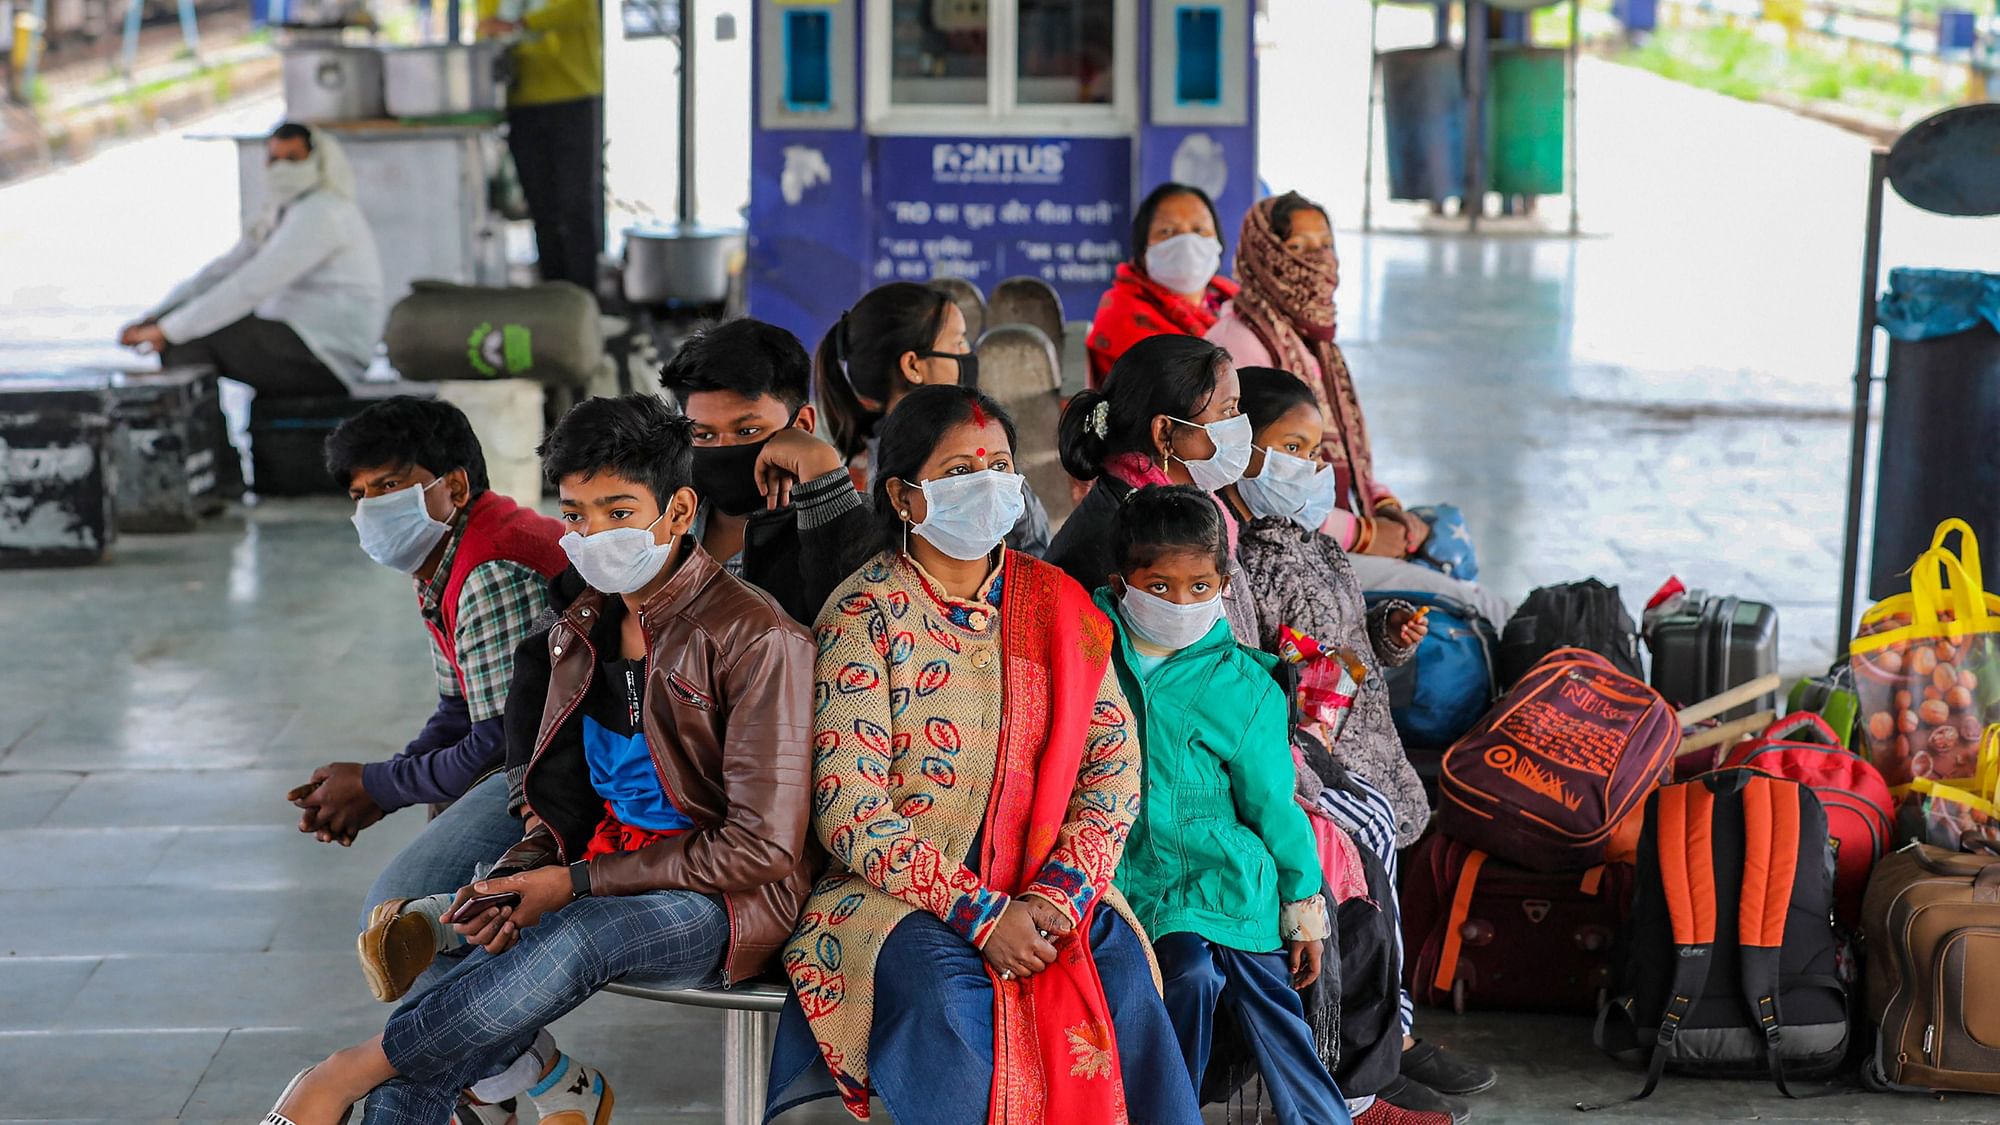 Passengers wait at a railway station following cancellation of trains in the wake of coronavirus pandemic.